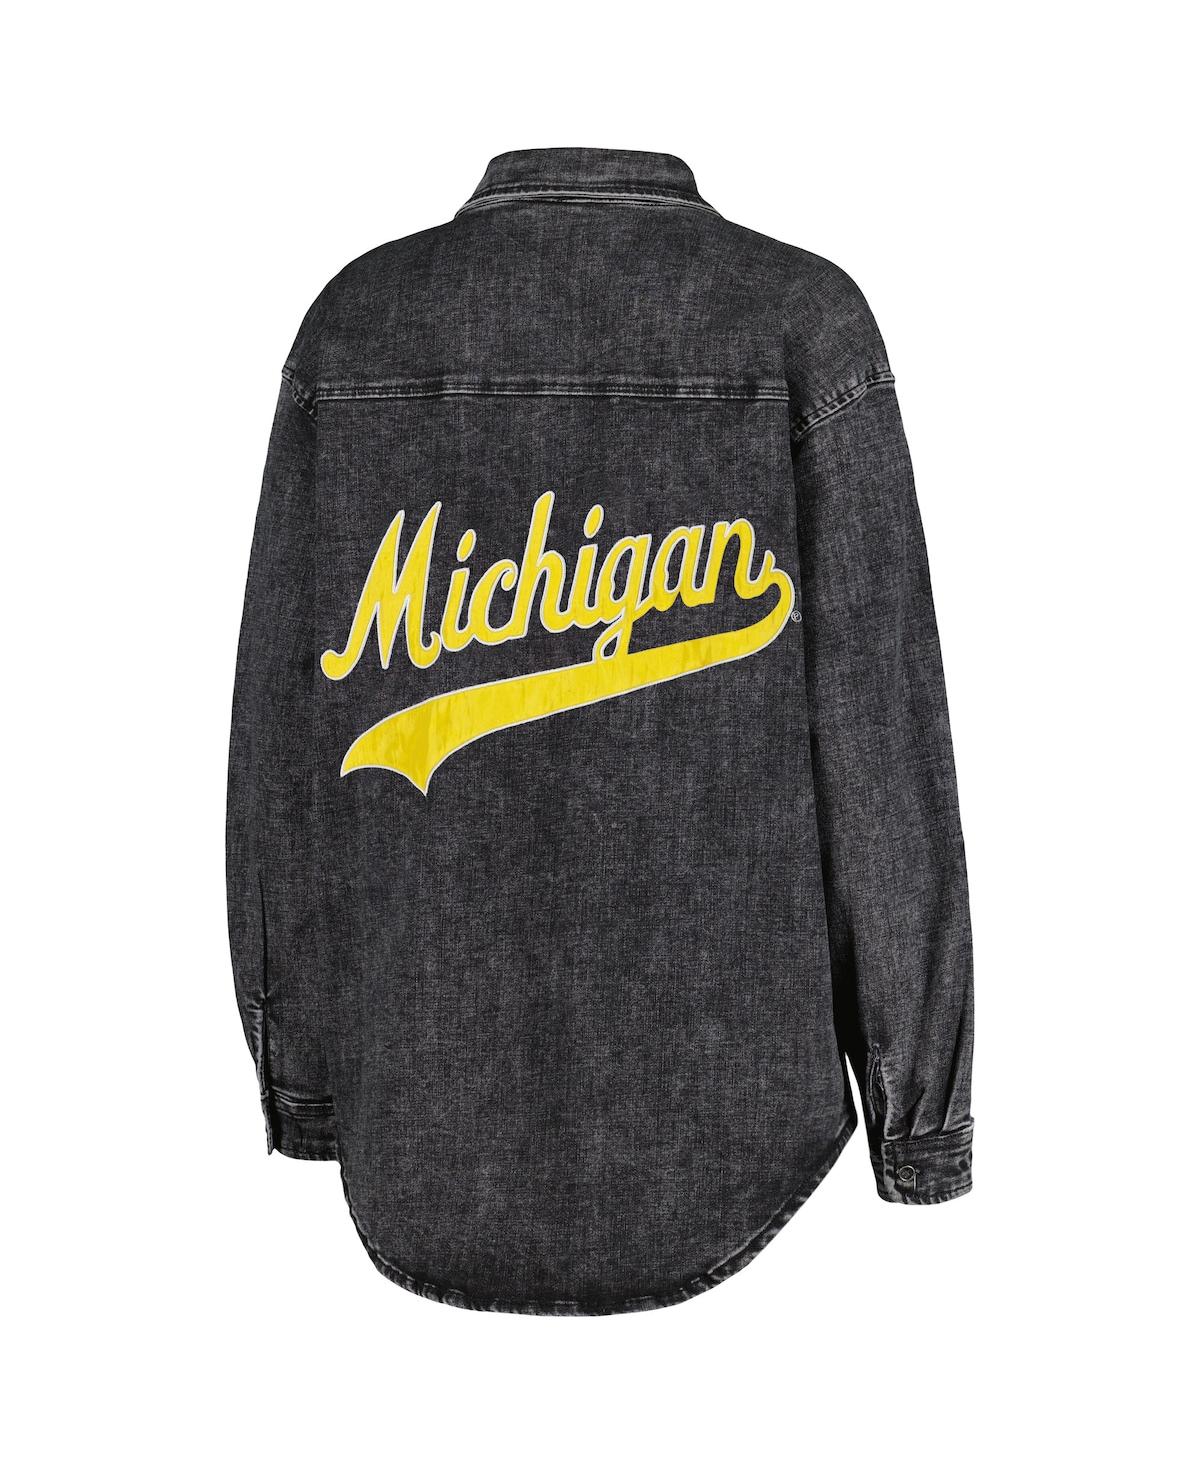 Shop Gameday Couture Women's  Charcoal Michigan Wolverines Multi-hit Tri-blend Oversized Button-up Denim J